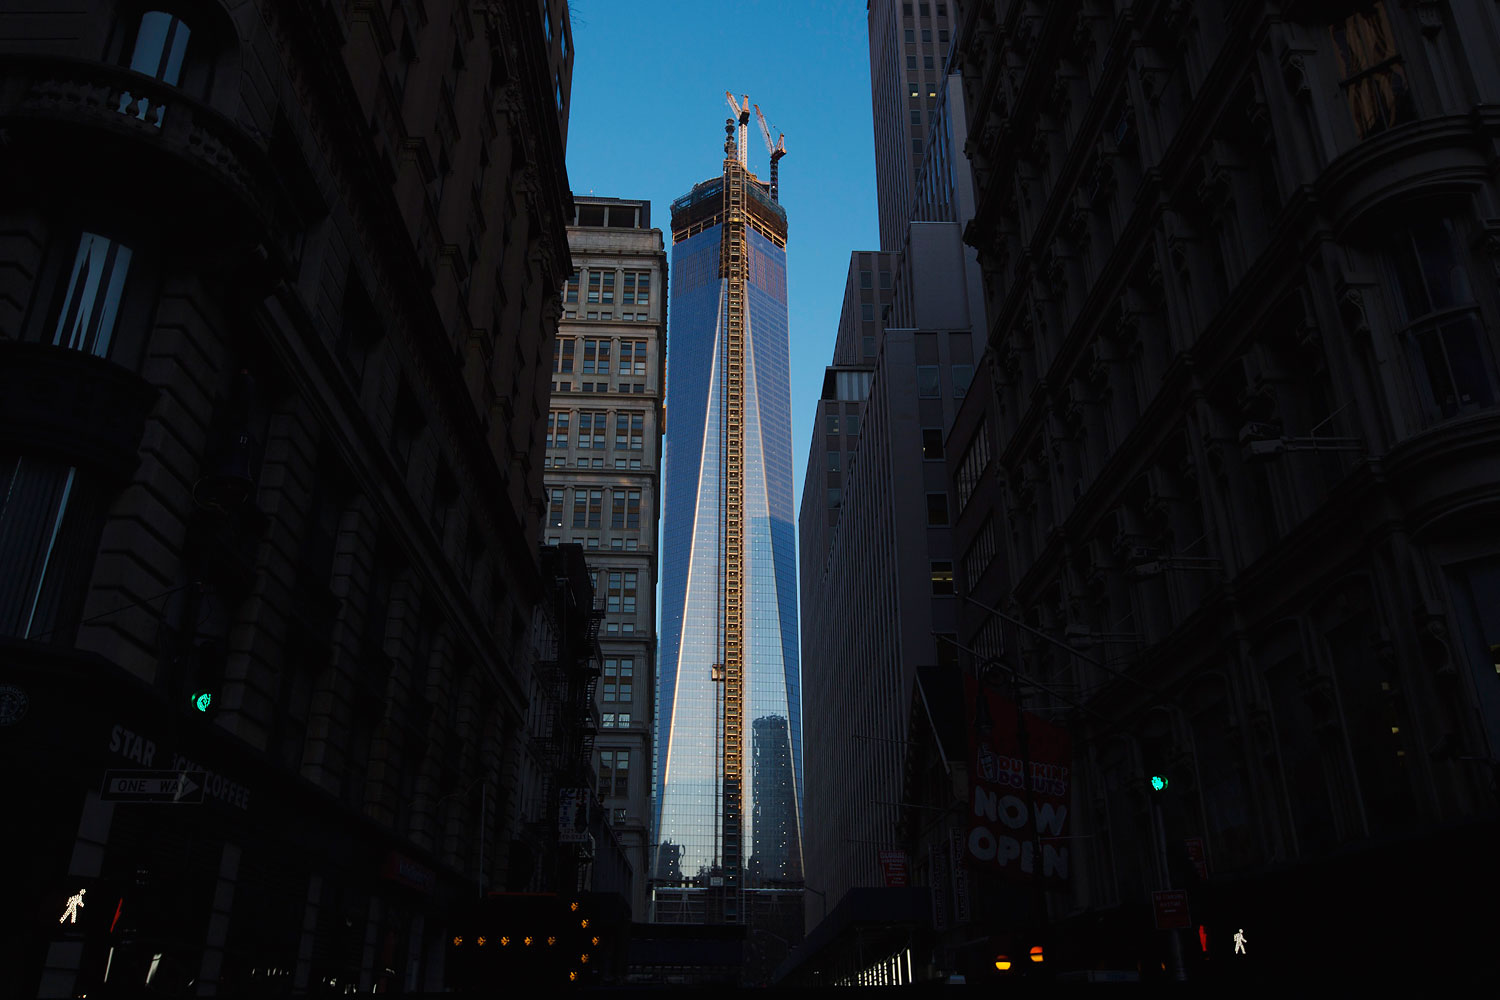 The rising sun hits the side of One World Trade Center as it stands among other buildings in New York, April 2, 2013.